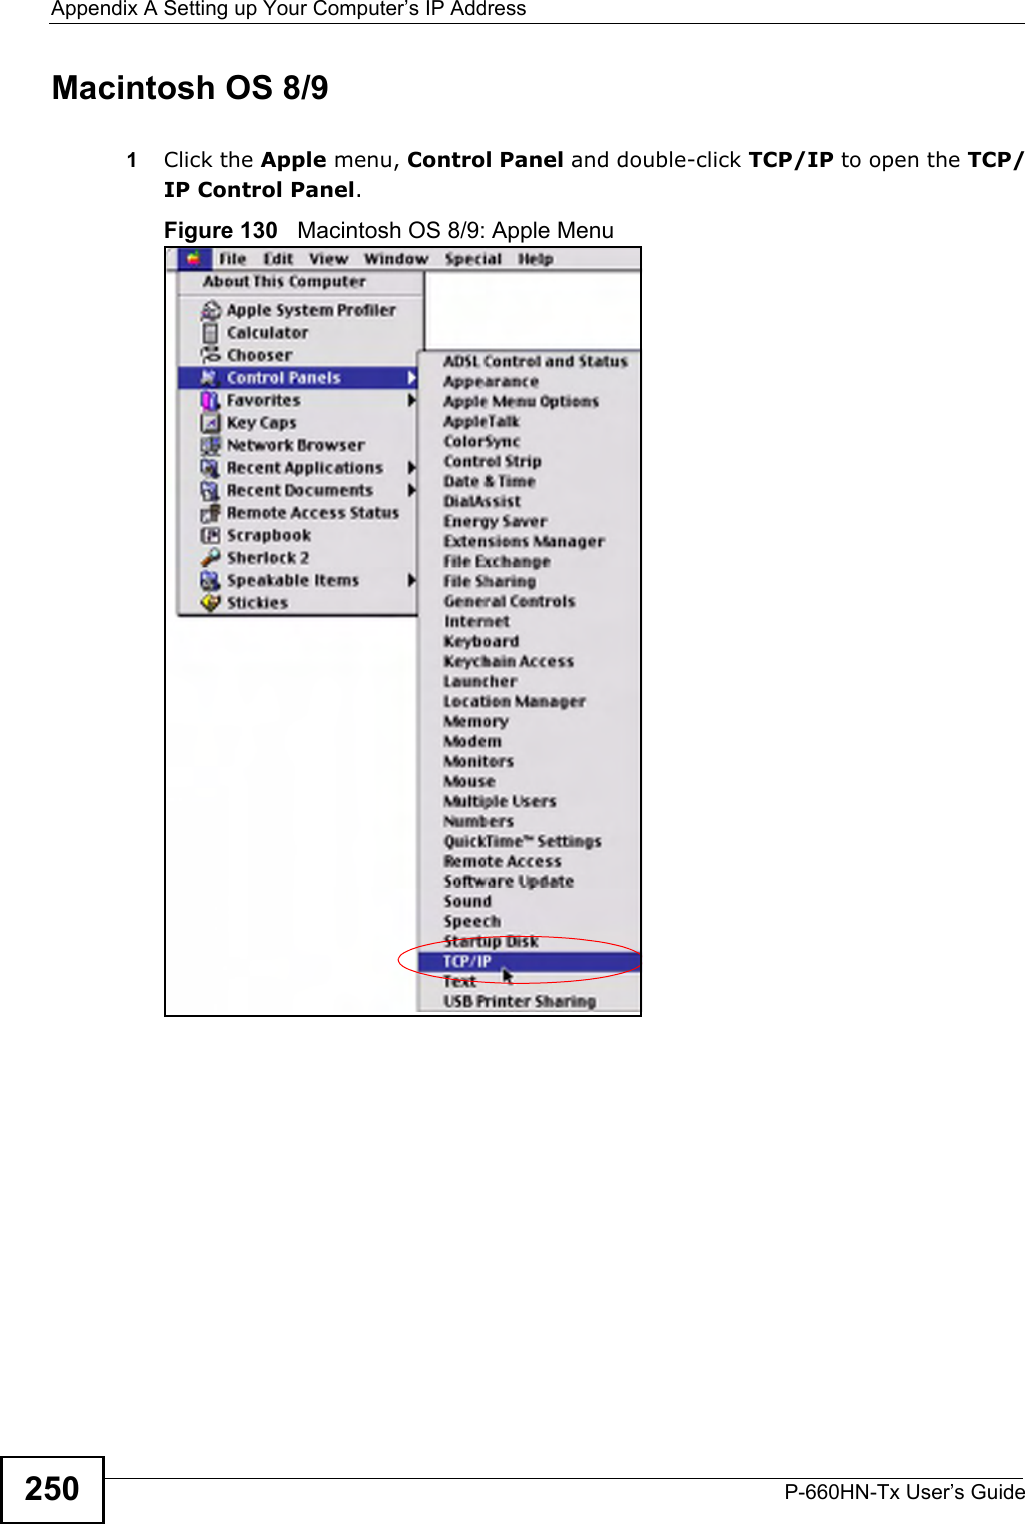 Appendix A Setting up Your Computer’s IP AddressP-660HN-Tx User’s Guide250Macintosh OS 8/9 1Click the Apple menu, Control Panel and double-click TCP/IP to open the TCP/IP Control Panel.Figure 130   Macintosh OS 8/9: Apple Menu